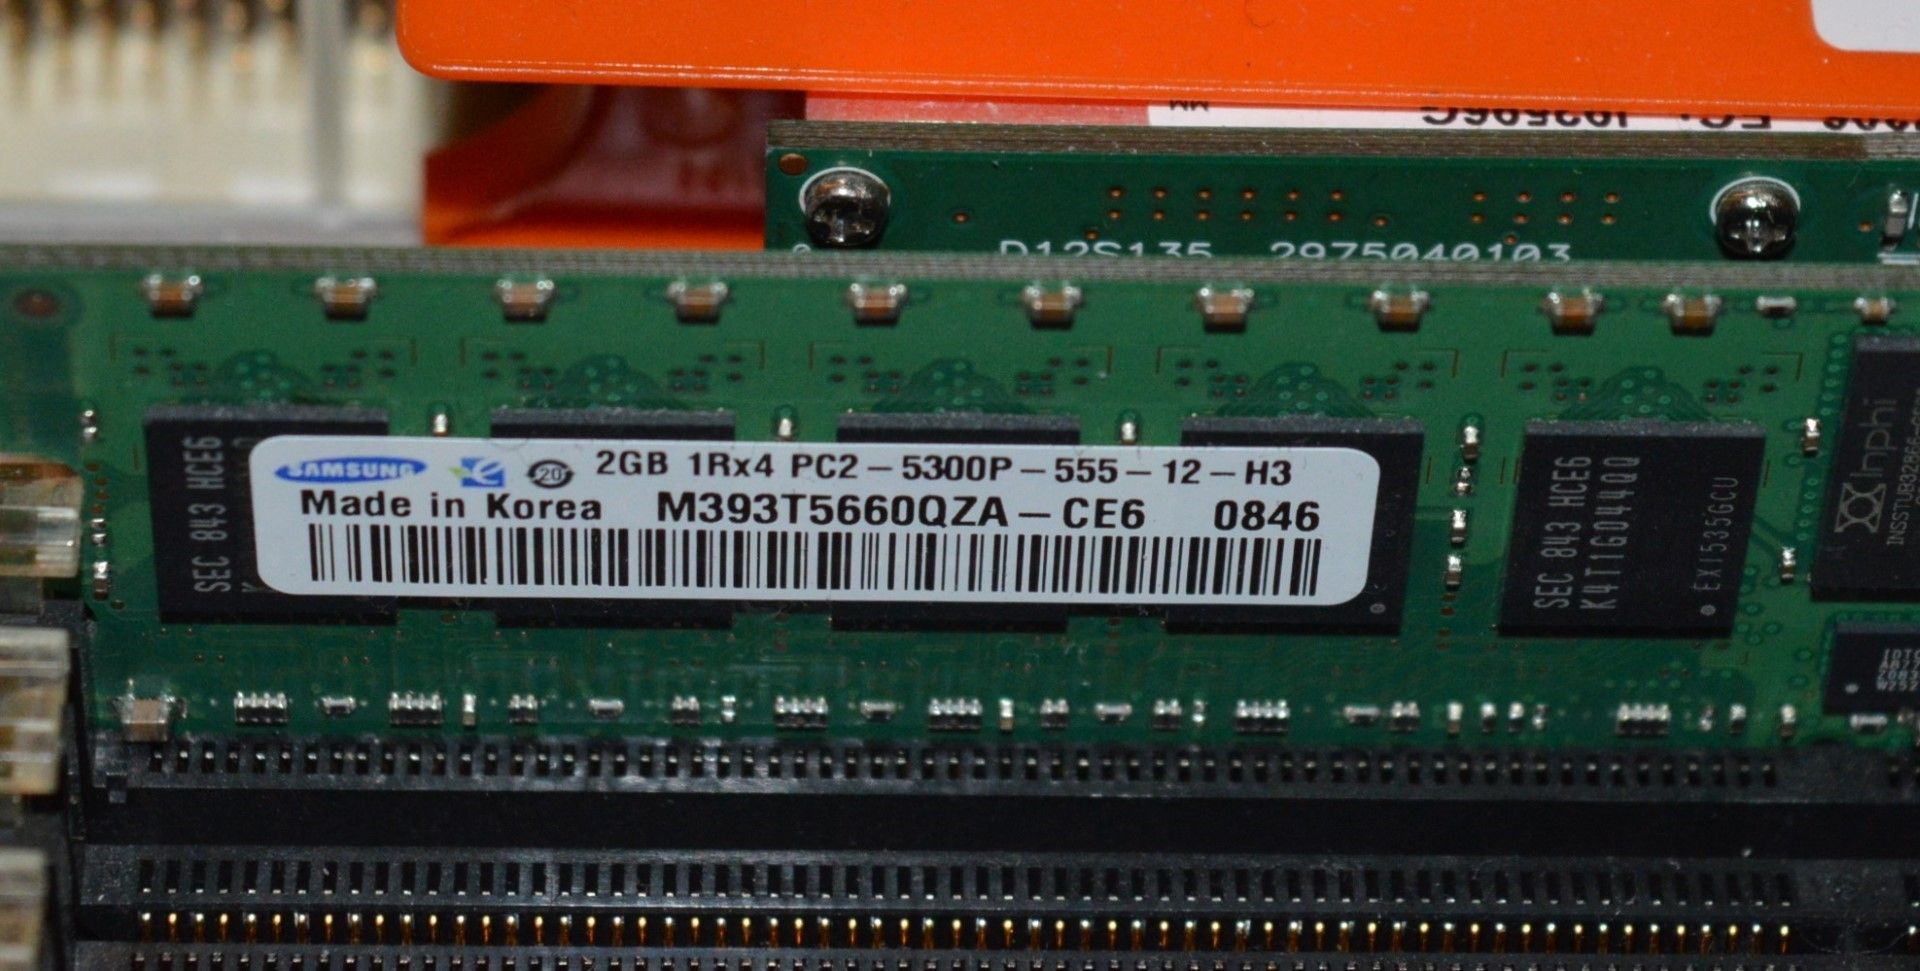 4 x IBM 44W4291 Memory Expansion Cards For X3850 M2 Servers - Each Card Includes 2gb System Ram - - Image 3 of 5